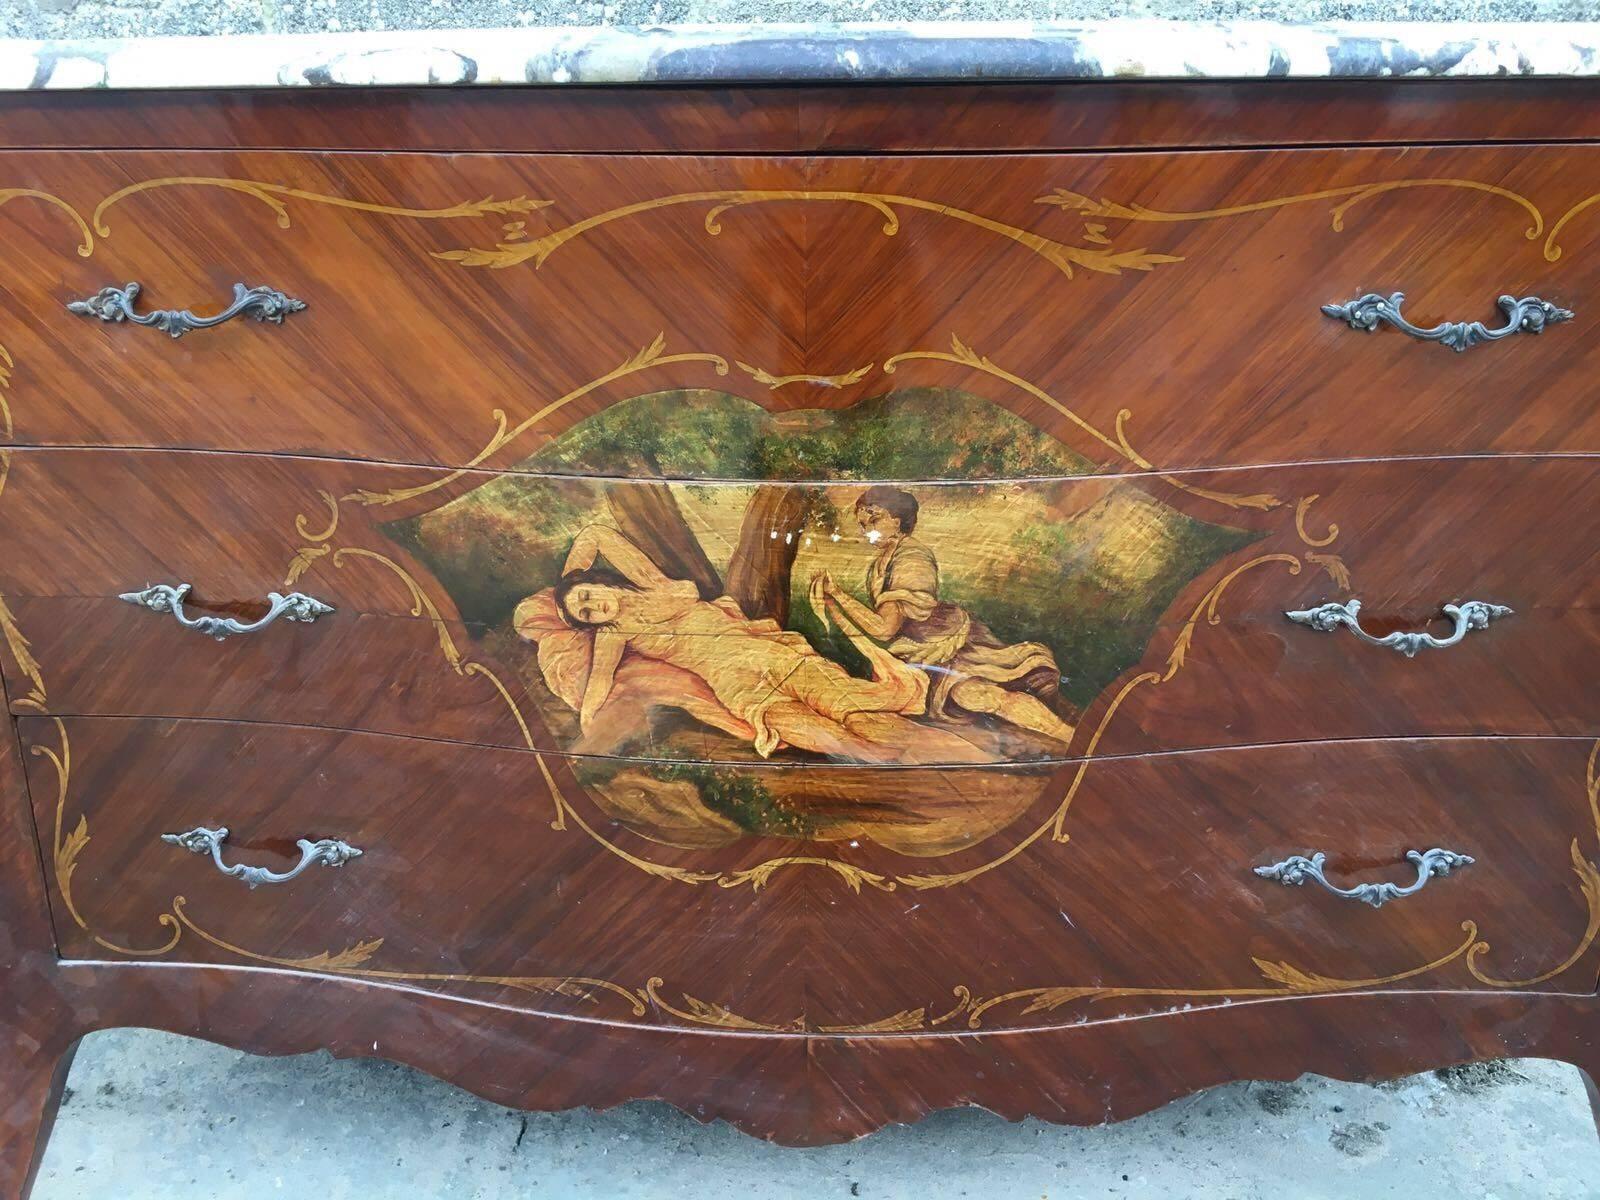  Here we have a lovely french chest of drawers with Marble top. Very unusual decoration, depicting a lovely scene. Serpentine fronted on splayed legs.


Dimensions- 141cm wide, 91cm tall, 54cm deep

 
See my other ads for more french furniture.